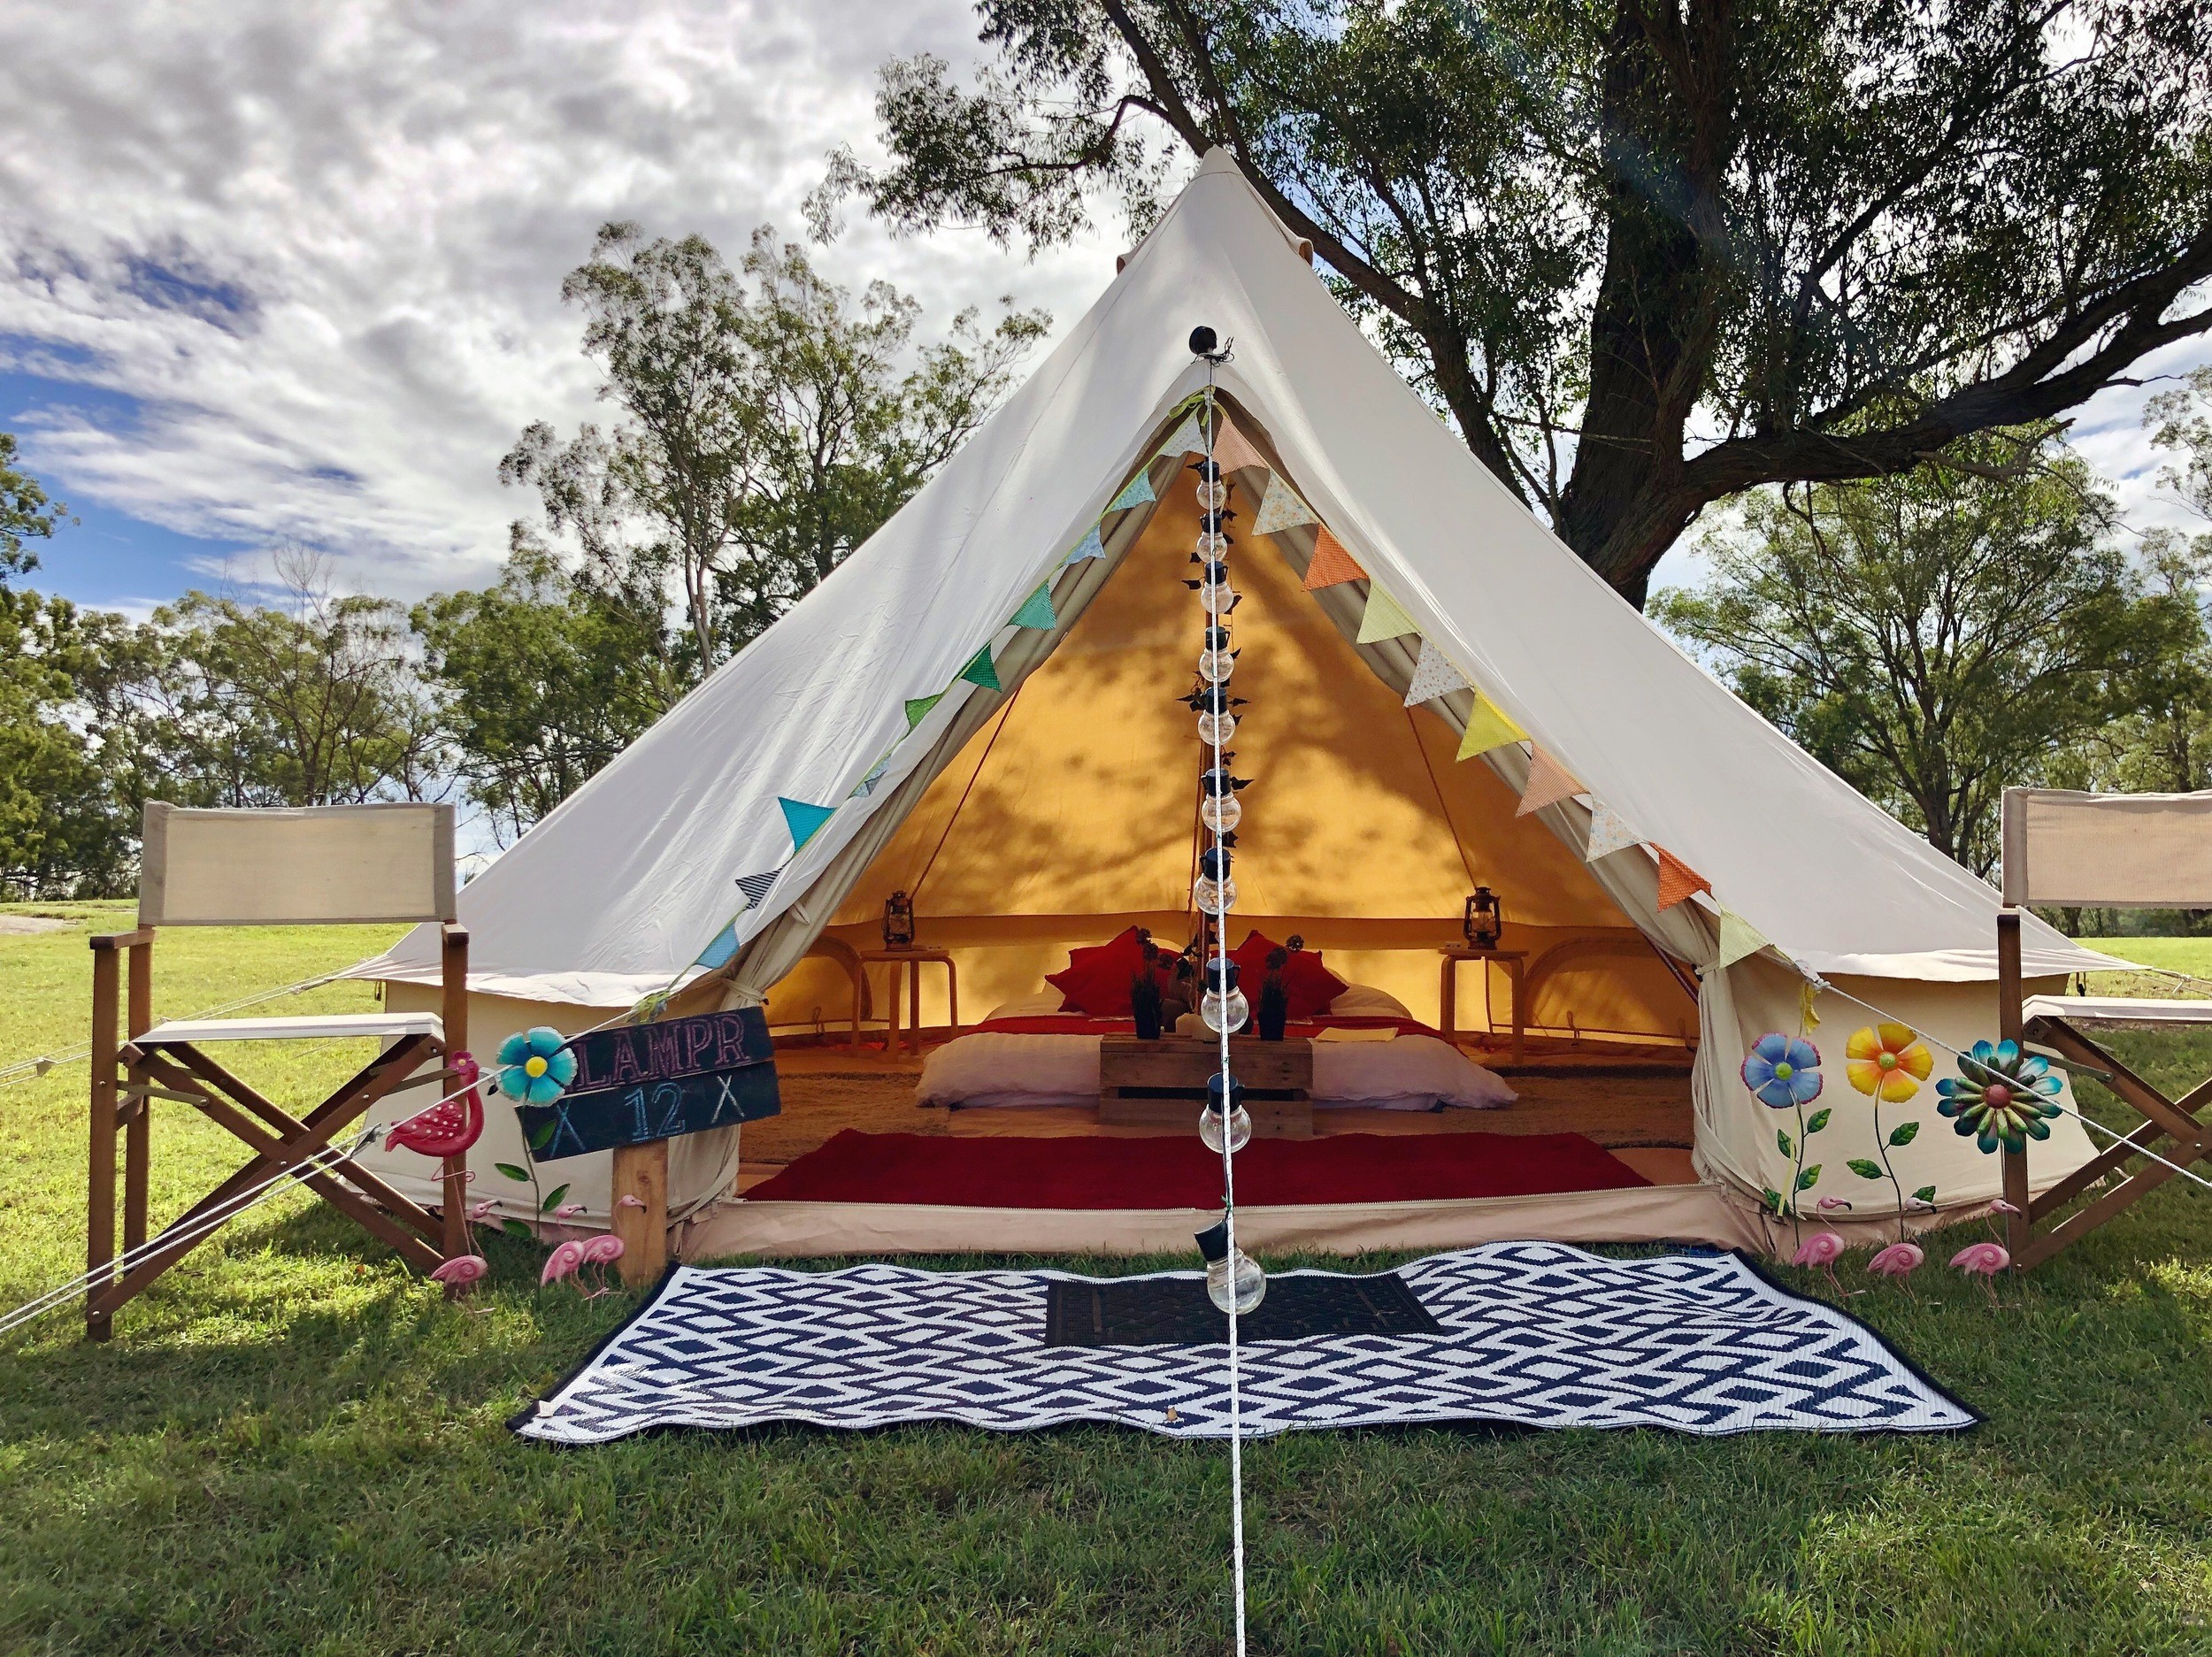 Popular Pop-Up Glamping & Events Business...Business For Sale